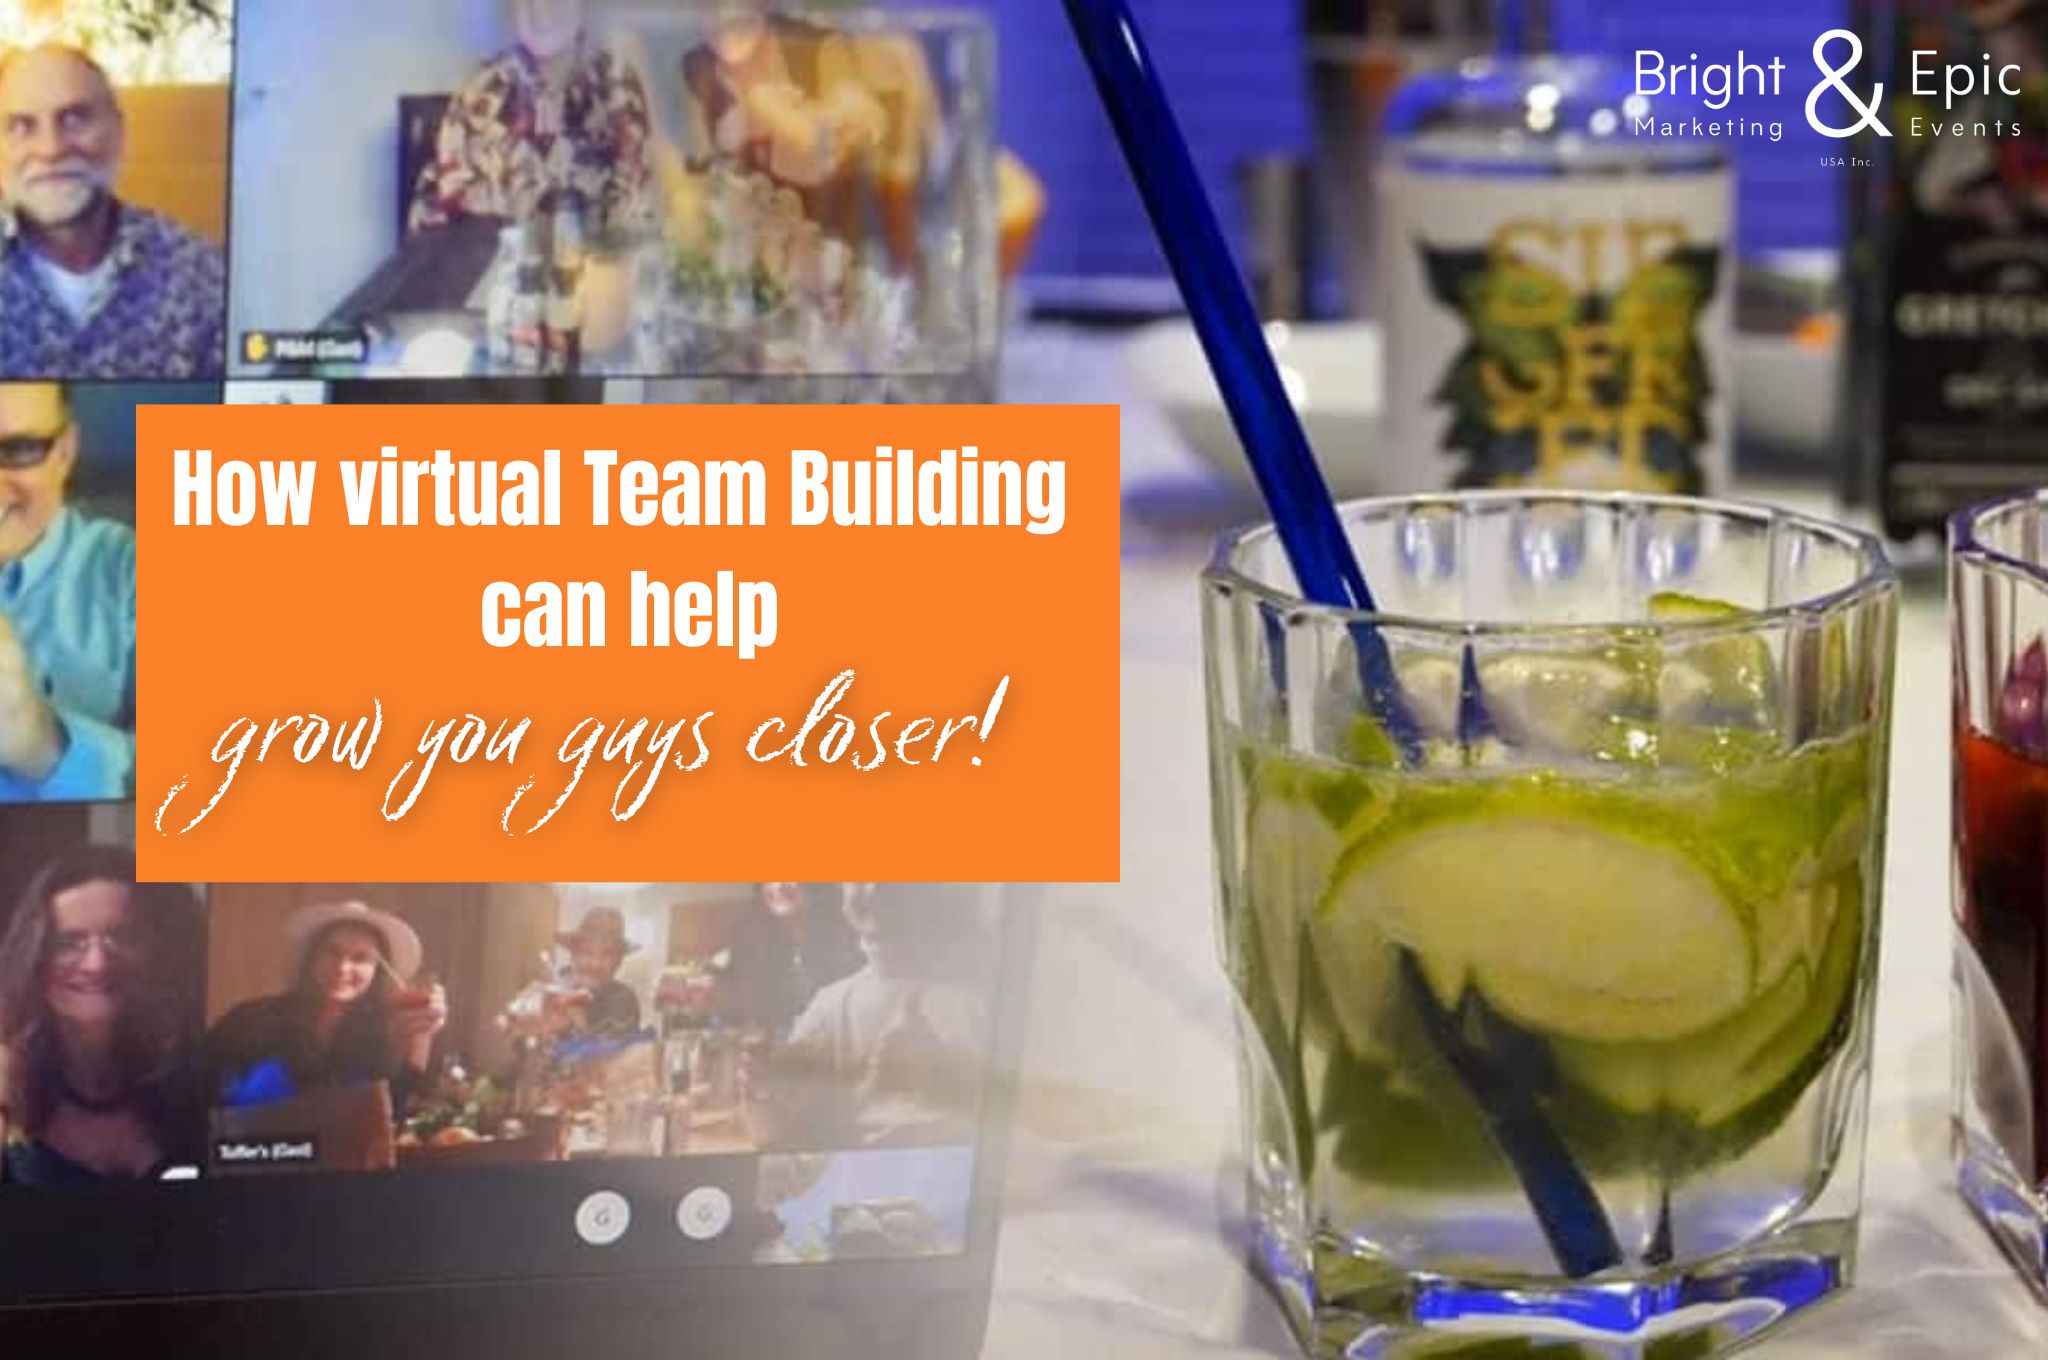 How virtual team building activities can help you grow closer - bright and epic USA Events